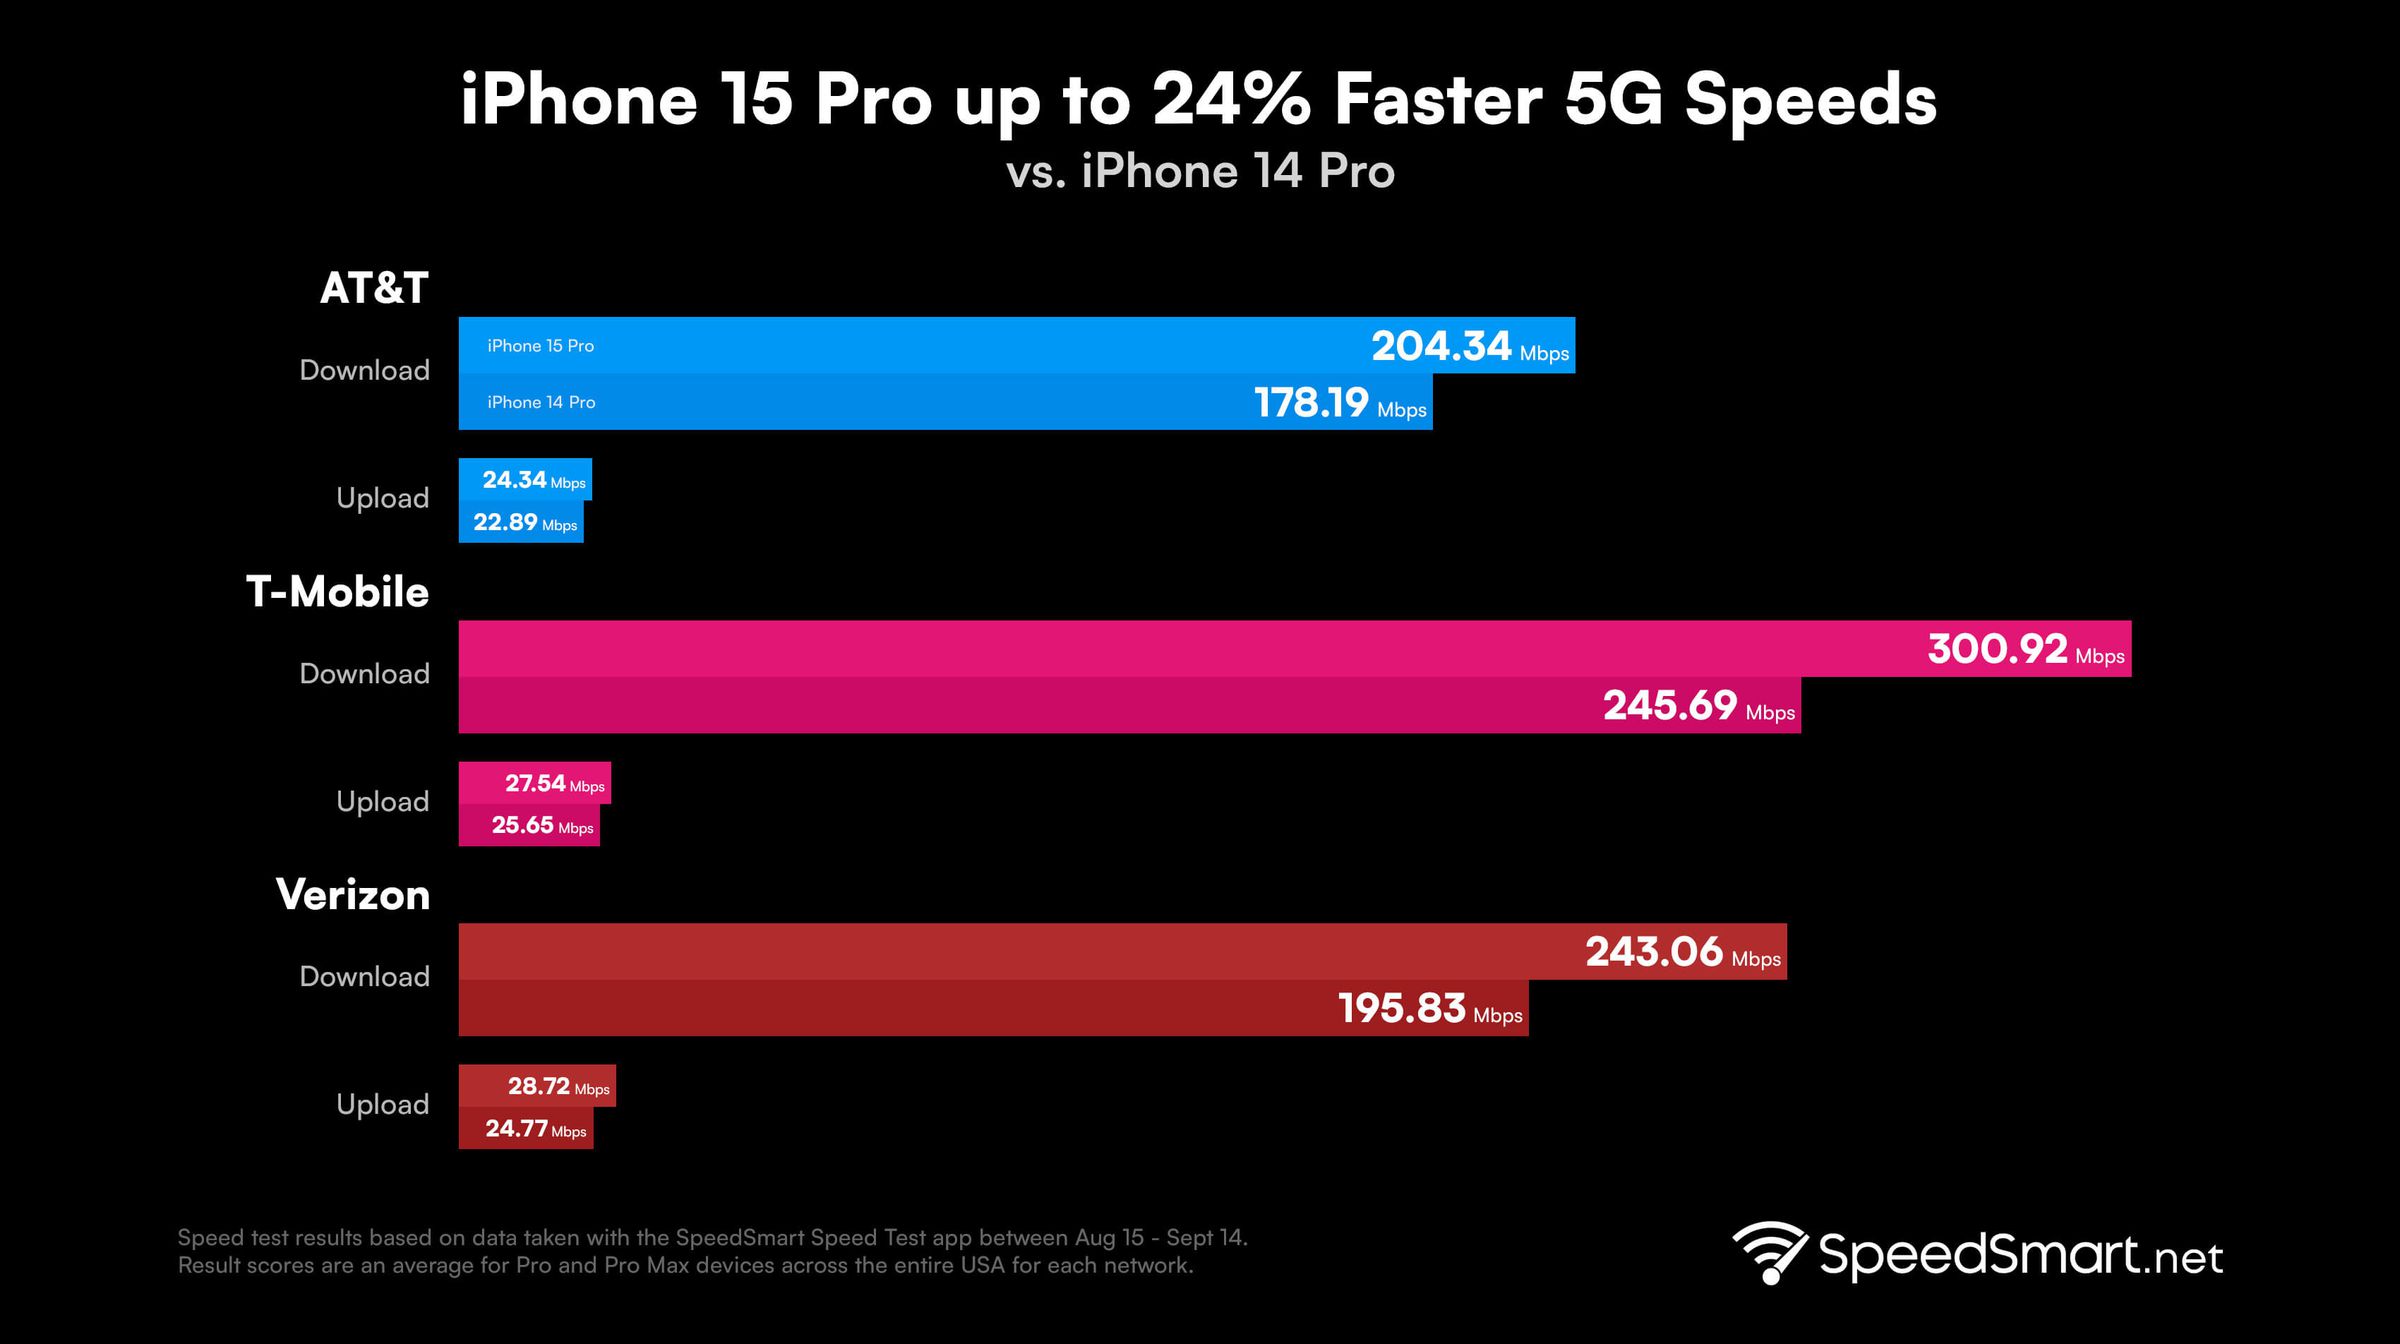 T-Mobile showed the fastest 5G speeds with an iPhone 15 Pro.